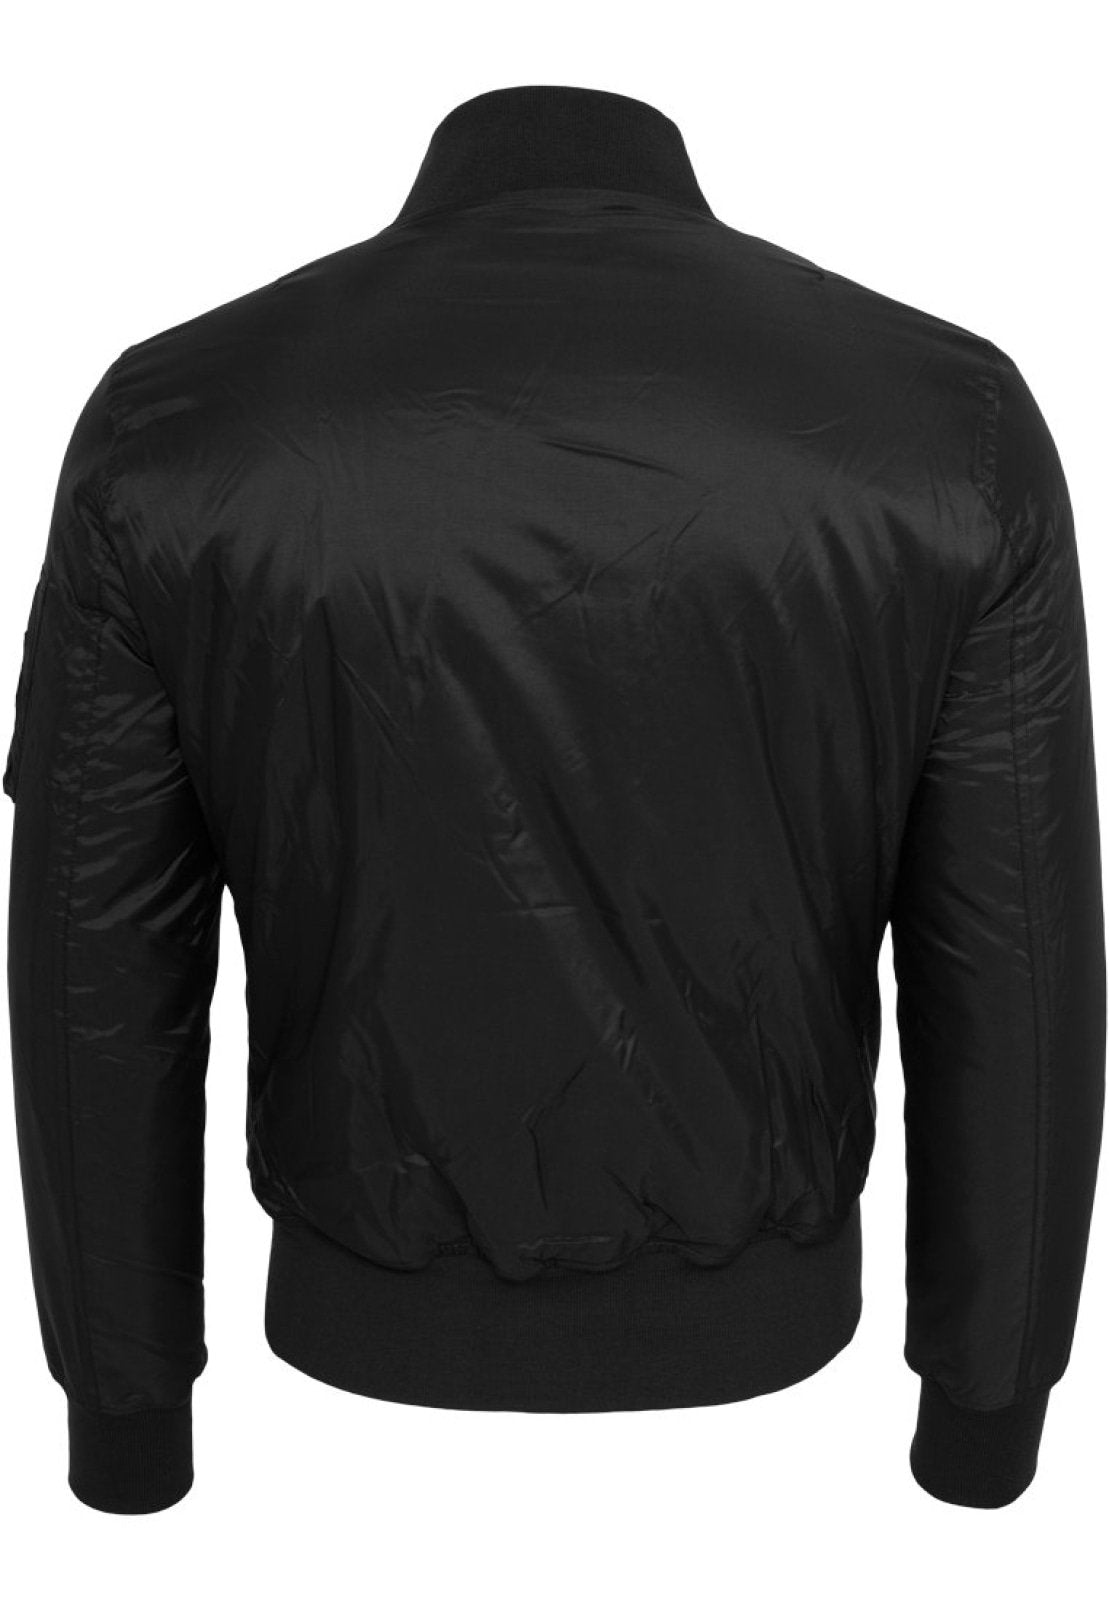 Street Wear Classic Bomber Jacket - BeExtra! Apparel & More